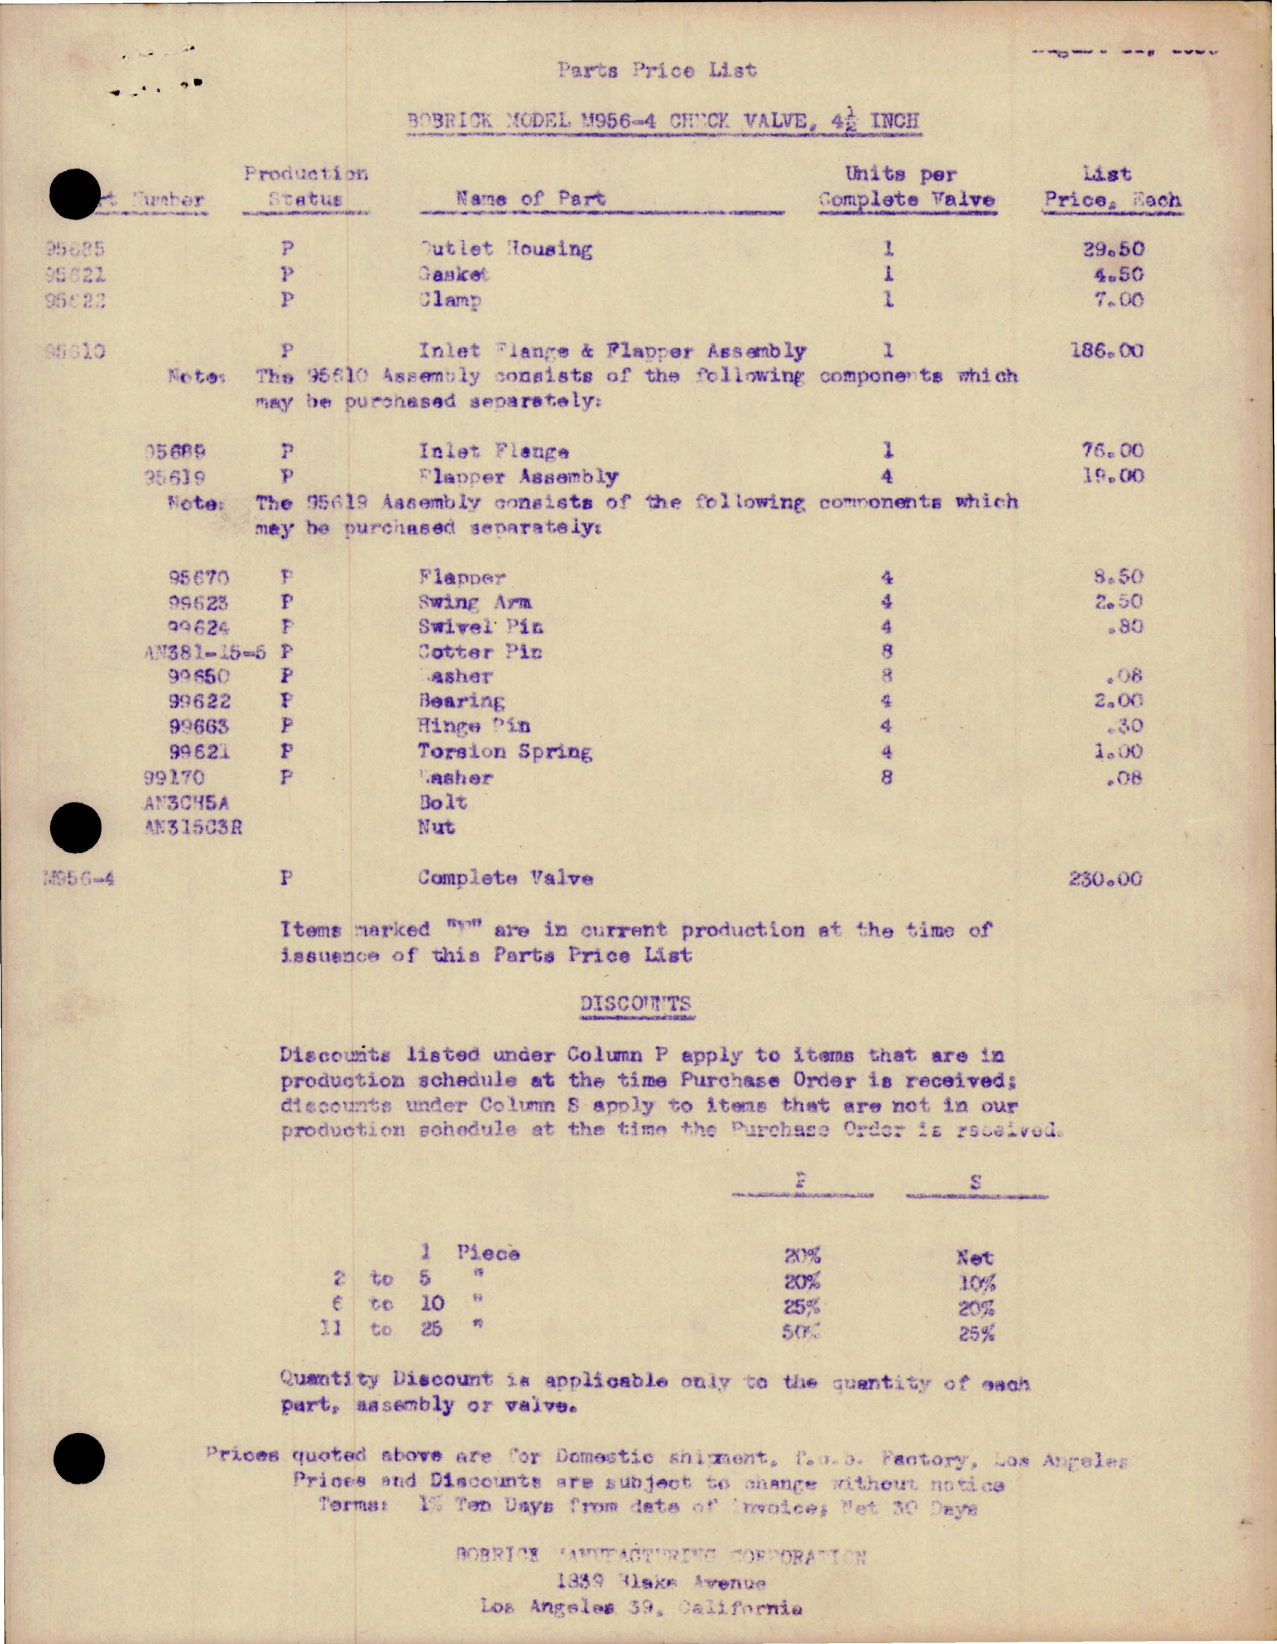 Sample page 1 from AirCorps Library document: Parts Price List for Check Valve 4 1/2 INCH - Model M956-4 